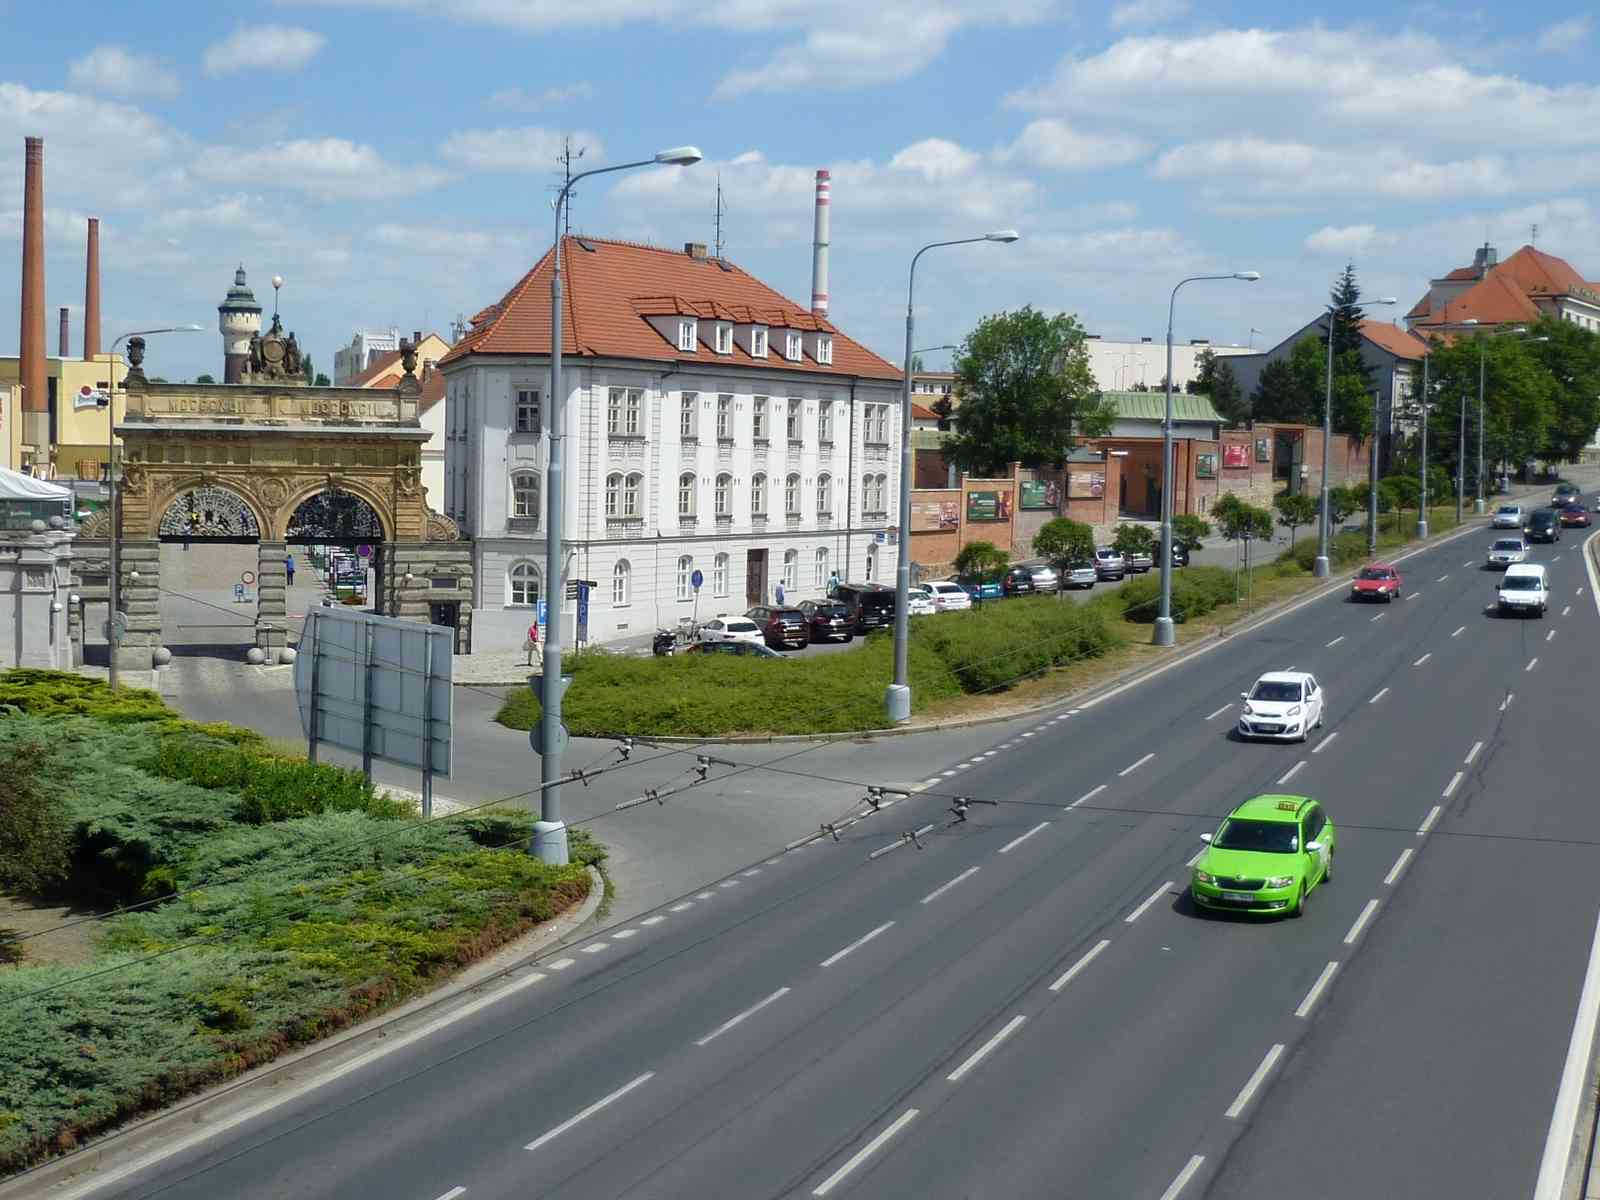 How to get to Pilsen from Prague.